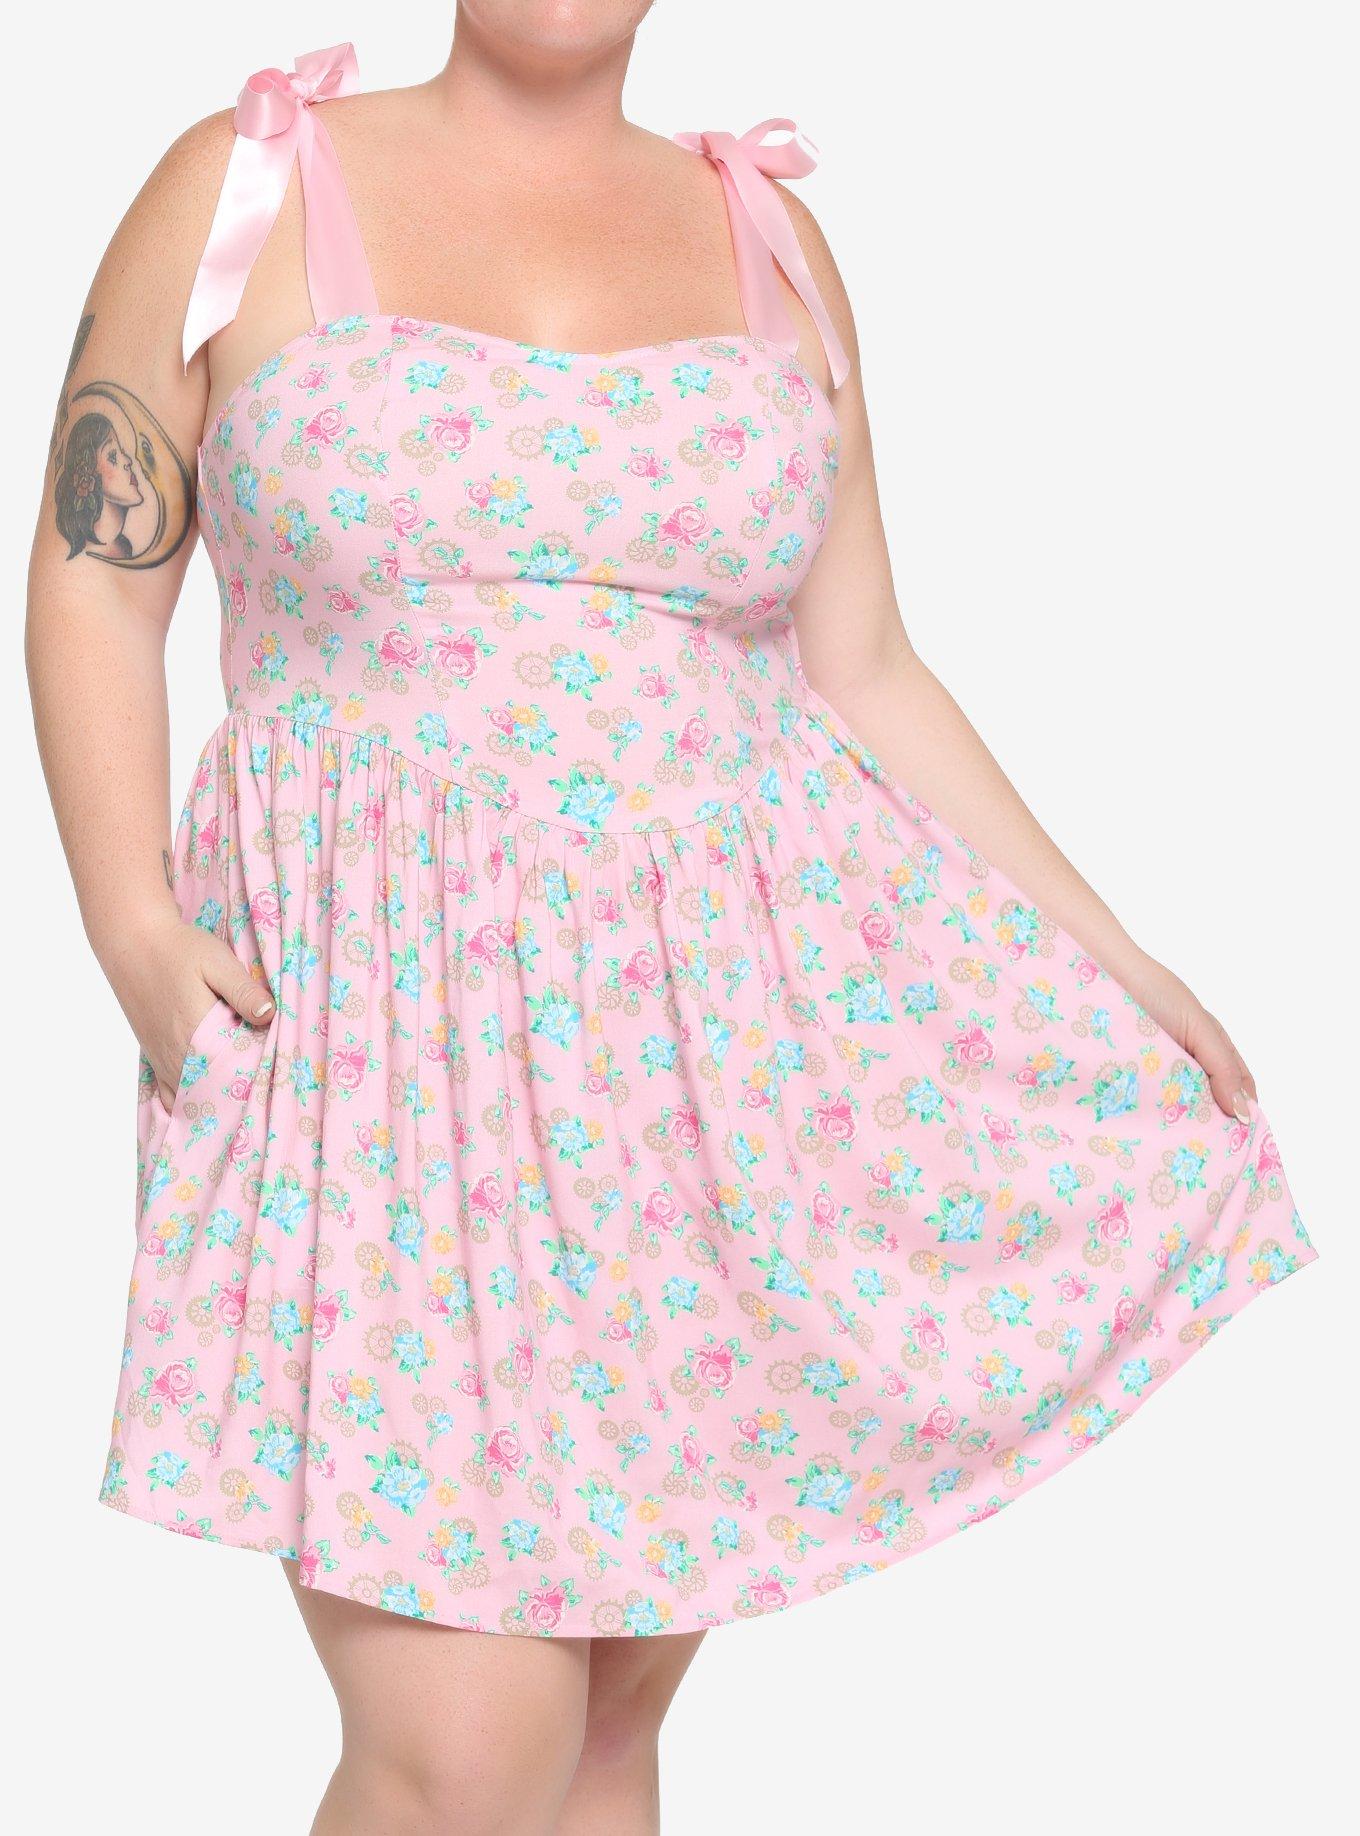 Pink Floral Gears Sweetheart Dress Plus Size, PINK, hi-res